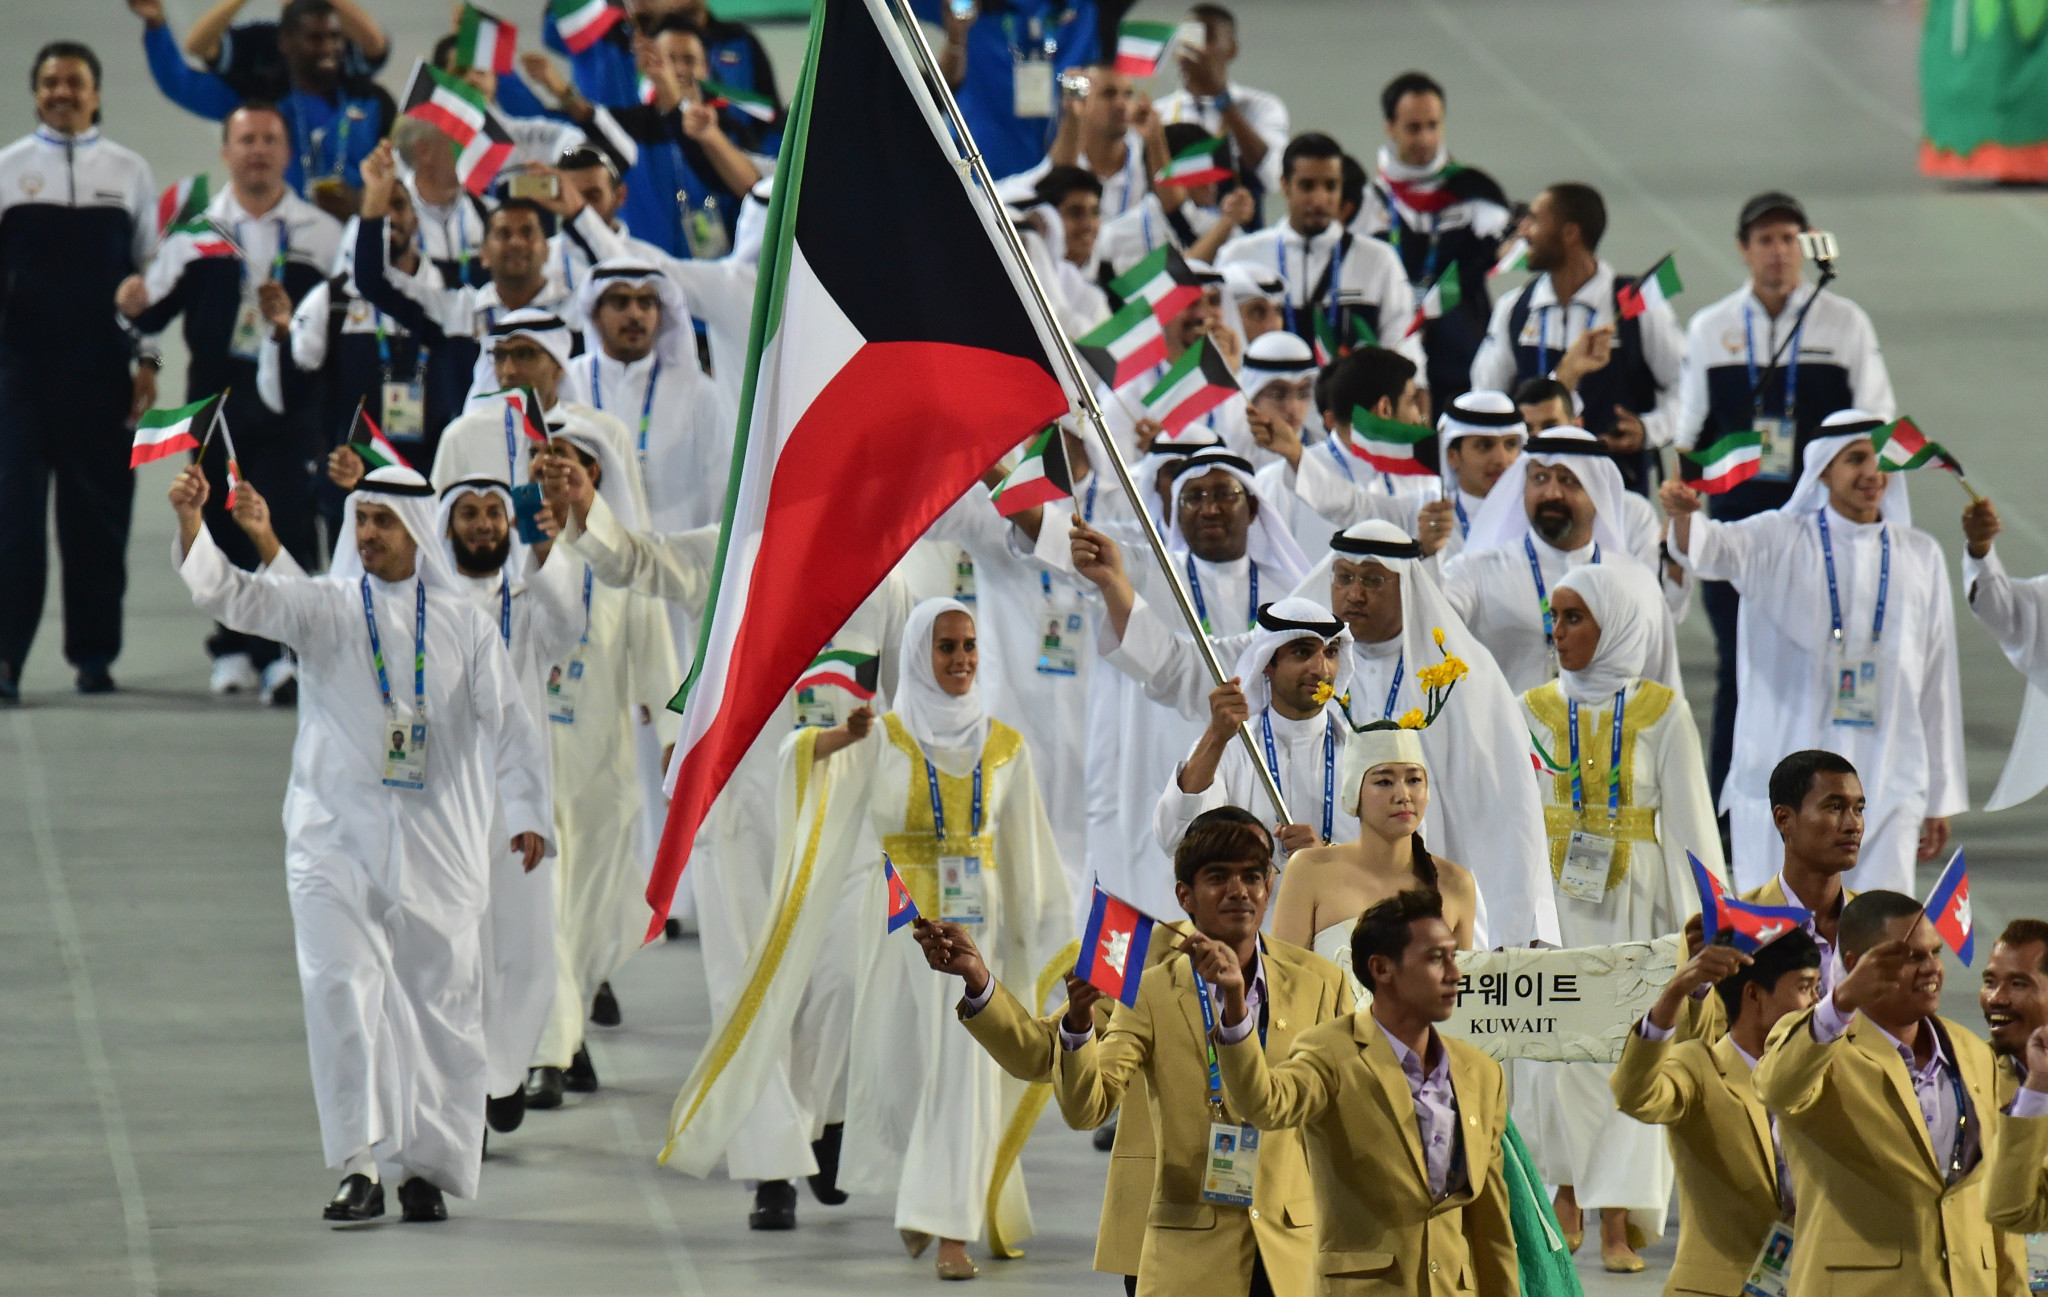 A ban on Kuwait has been lifted by the International Olympic Committee, allowing them to compete under their own flag at the Asian Games ©Getty Images